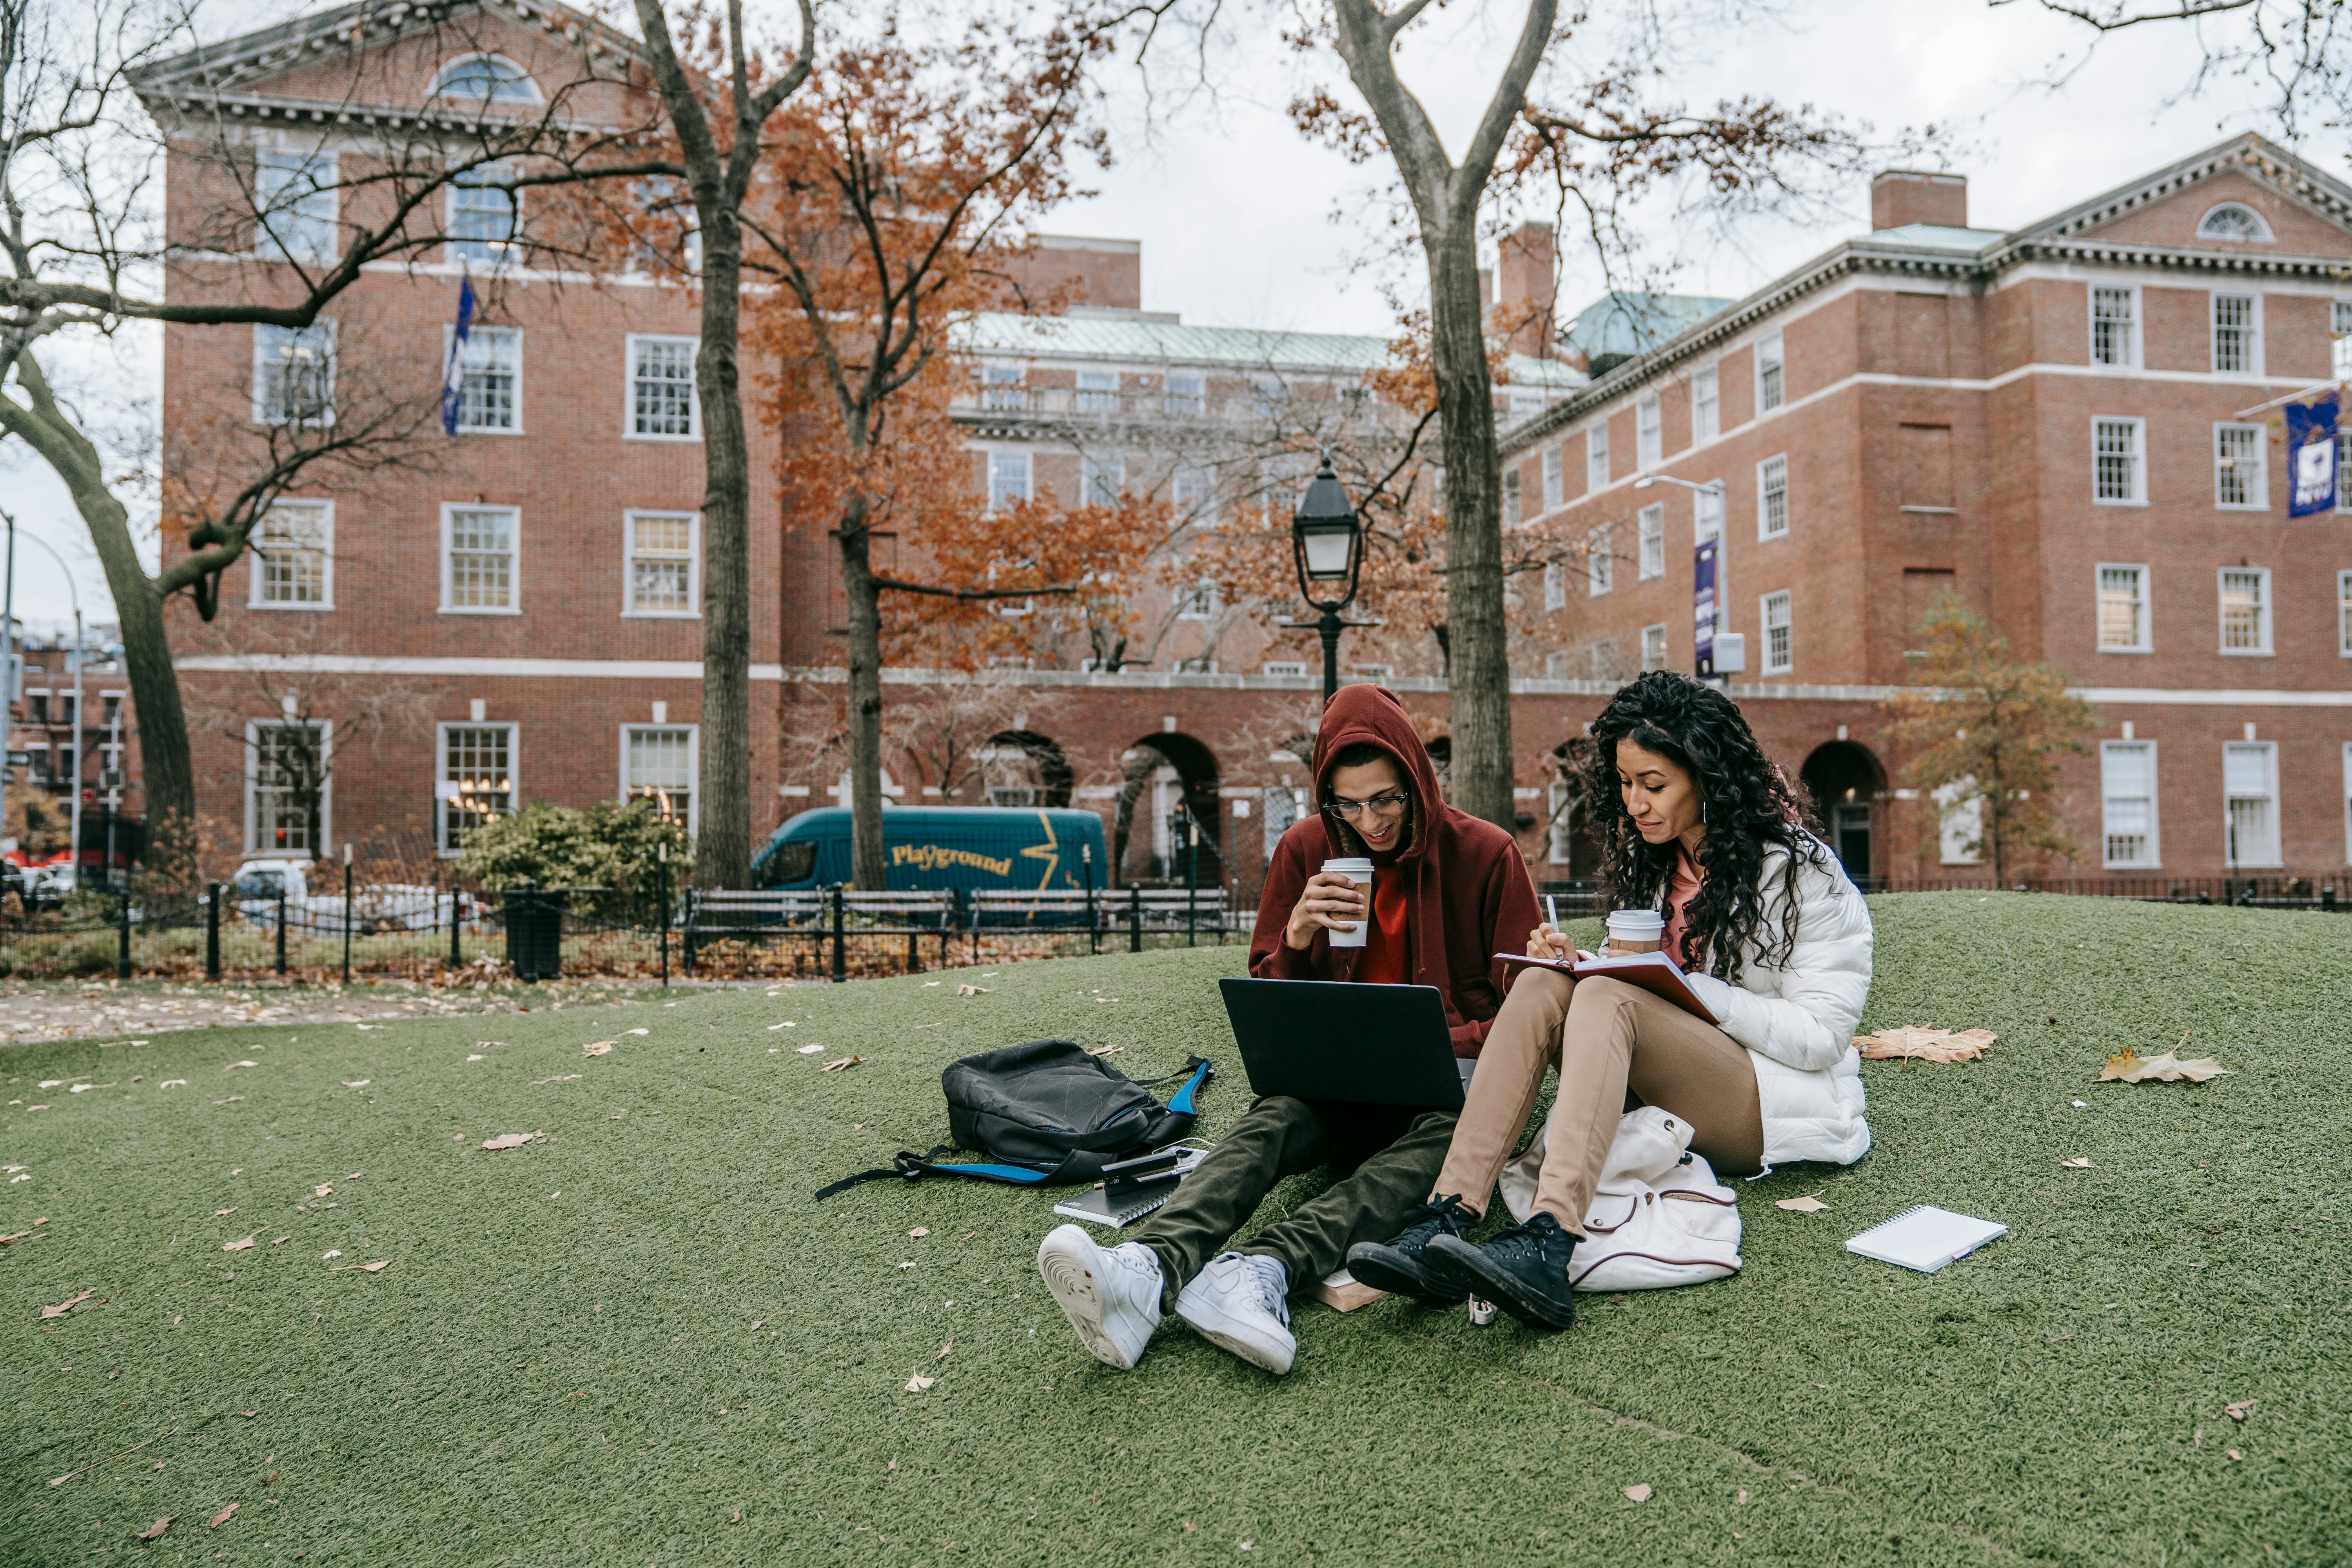 College students studying at a park | Source: Pexels